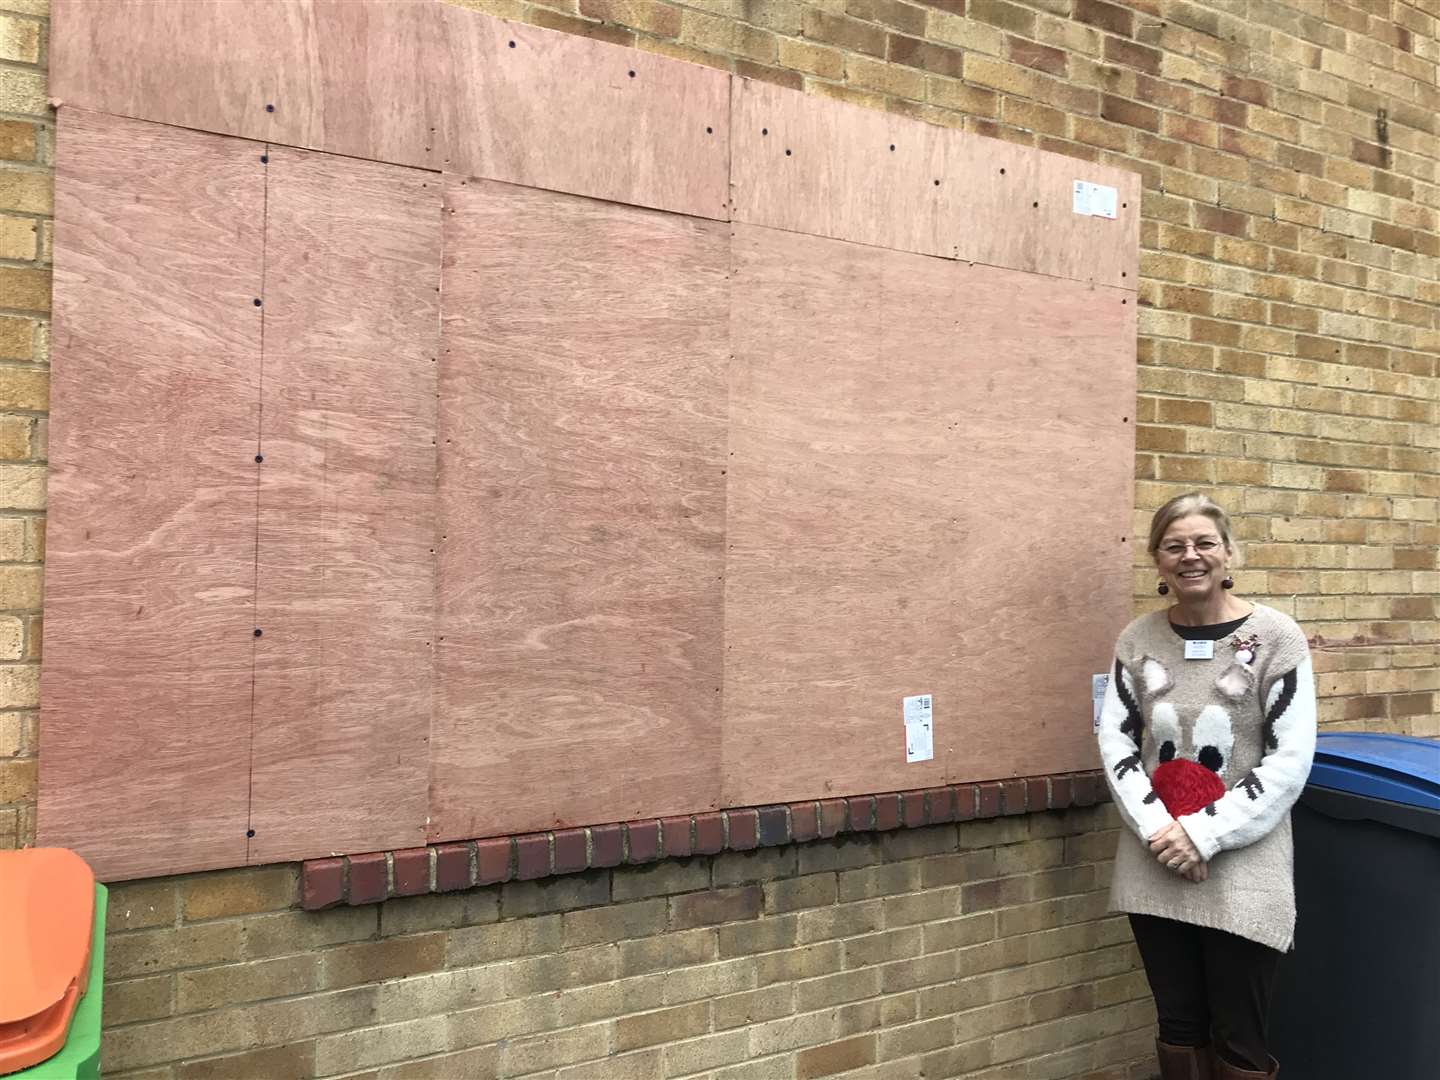 Amanda Sidwell, MADM founder, beside the office window that was smashed by burglars